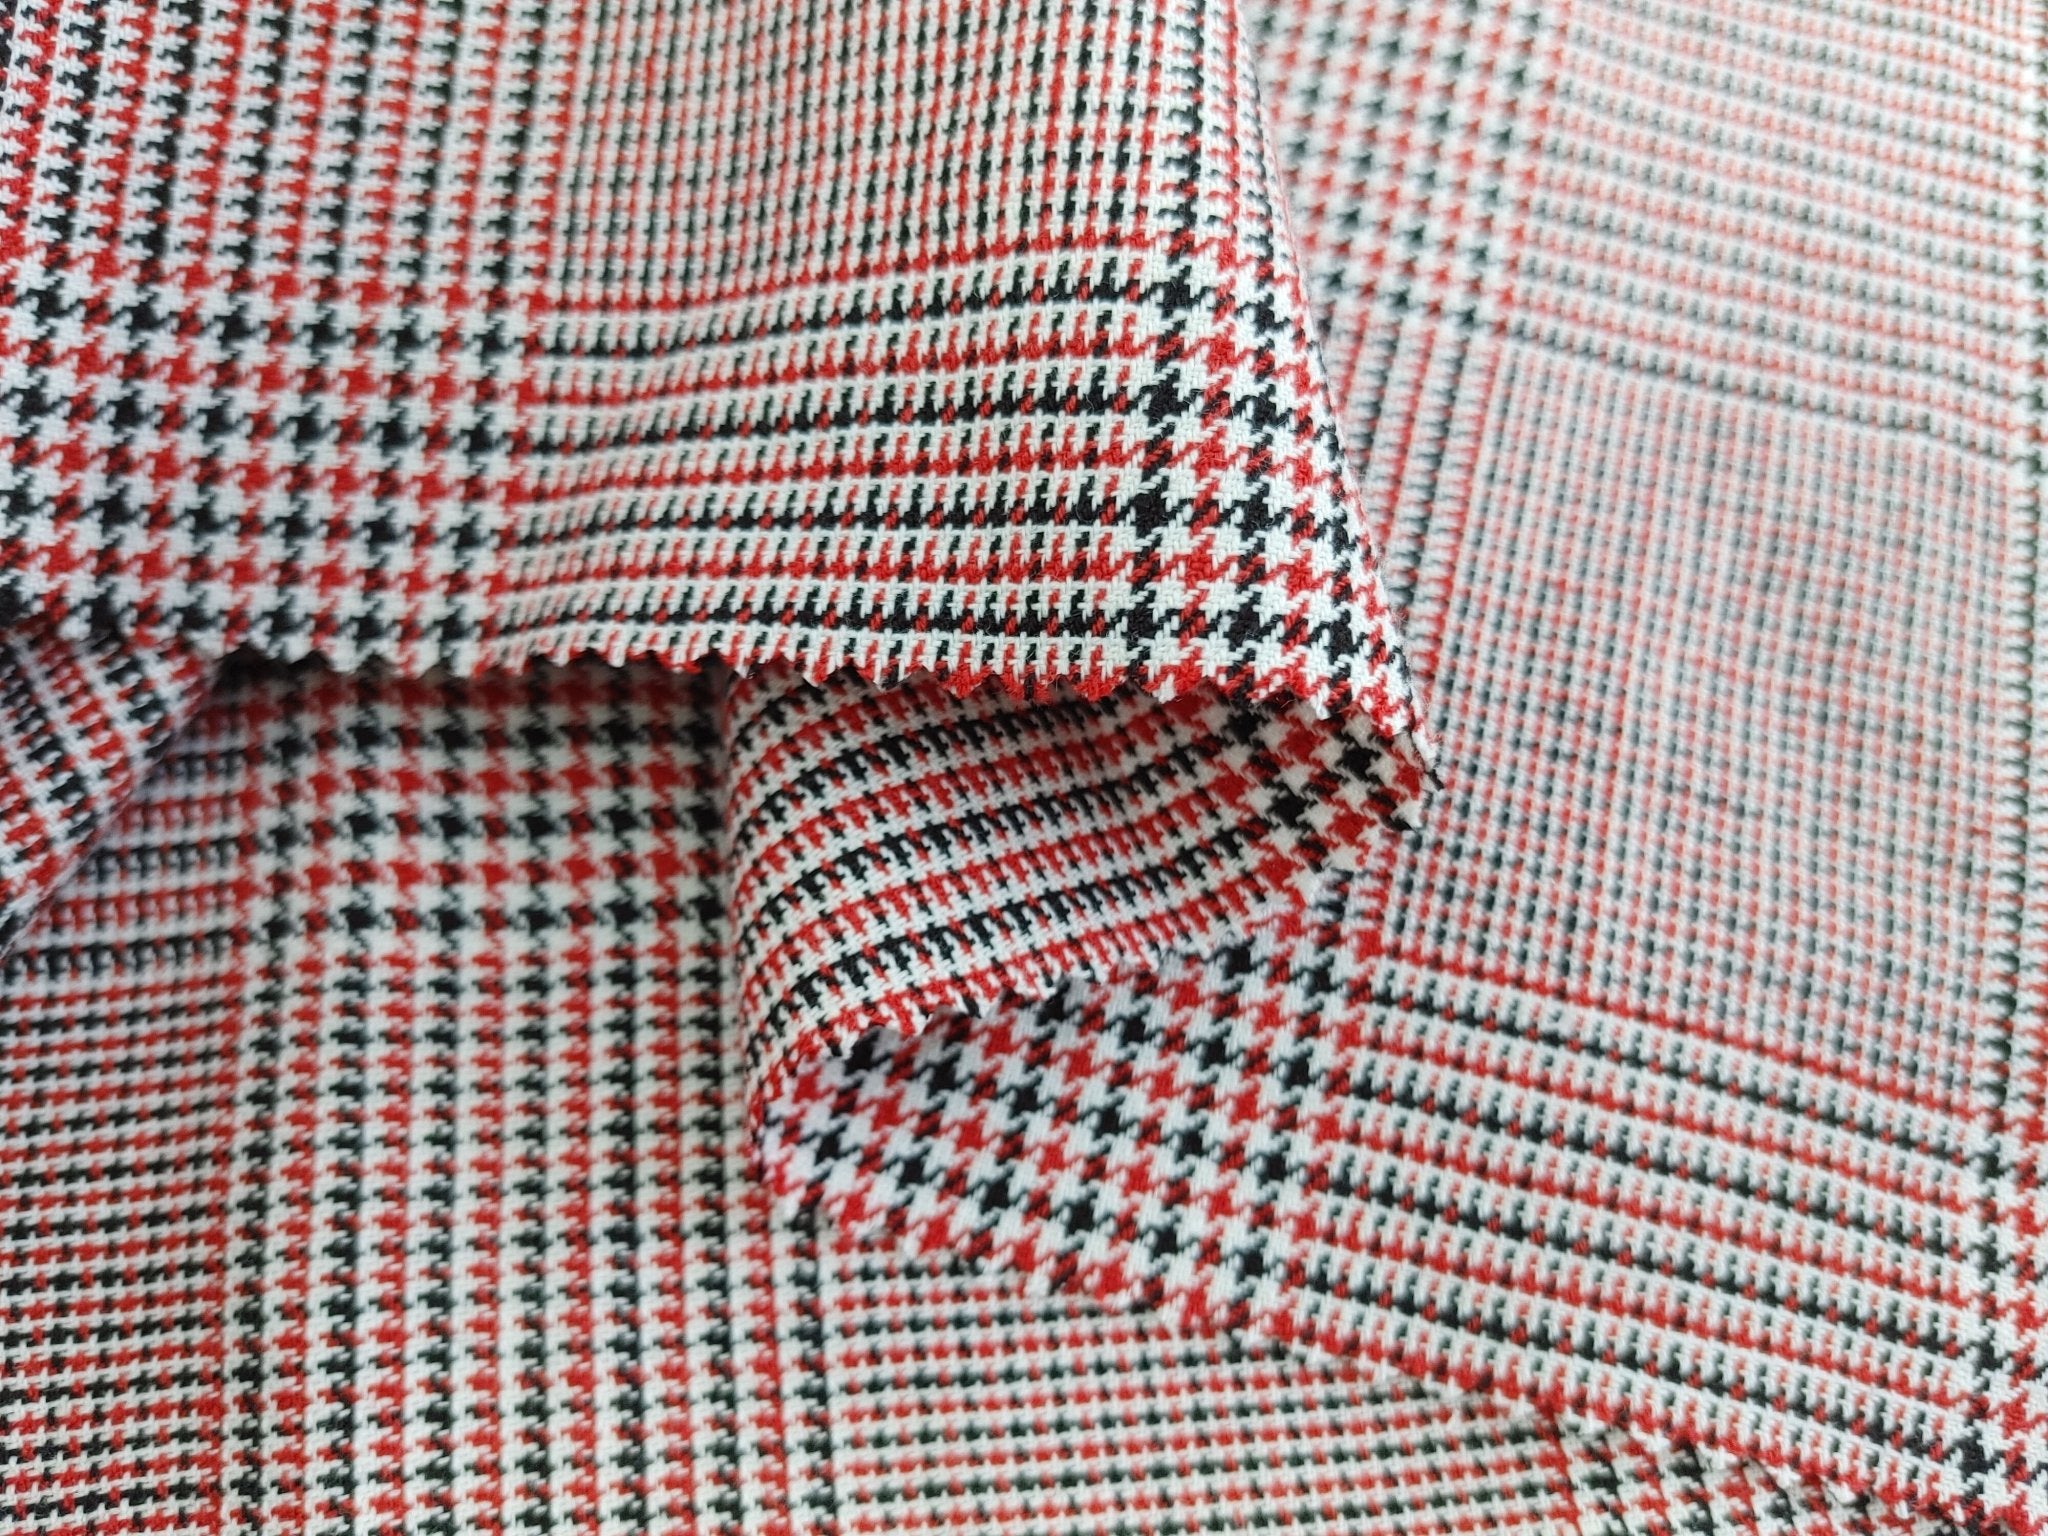 Tricolor Symphony: Linen Cotton Twill Glen Plaid in Medium Weight – White, Red, and Black 6759 - The Linen Lab - Red